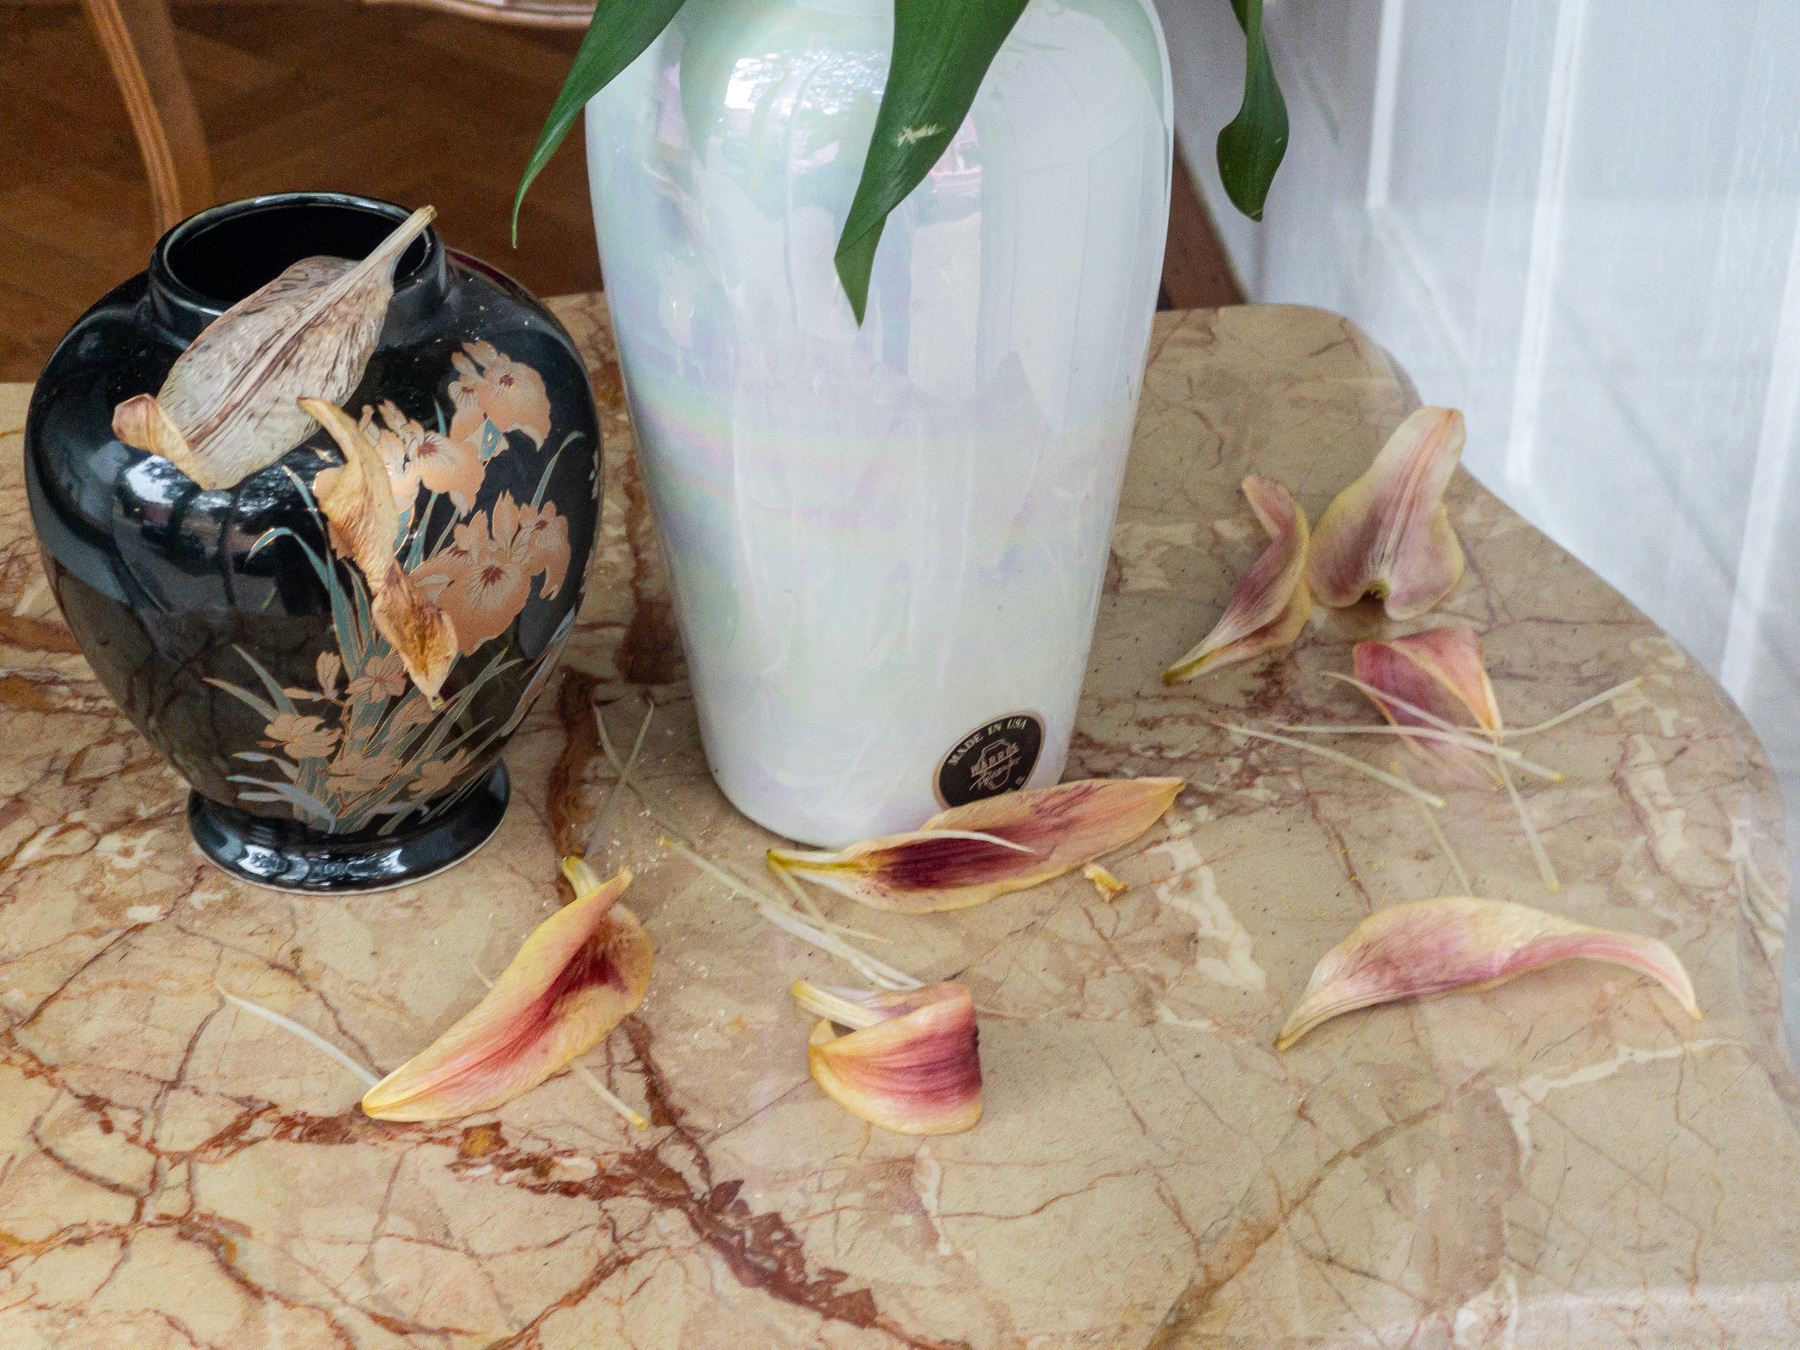 Lilly flower petals fallen on a marble table surface and a couple of vintage vases.